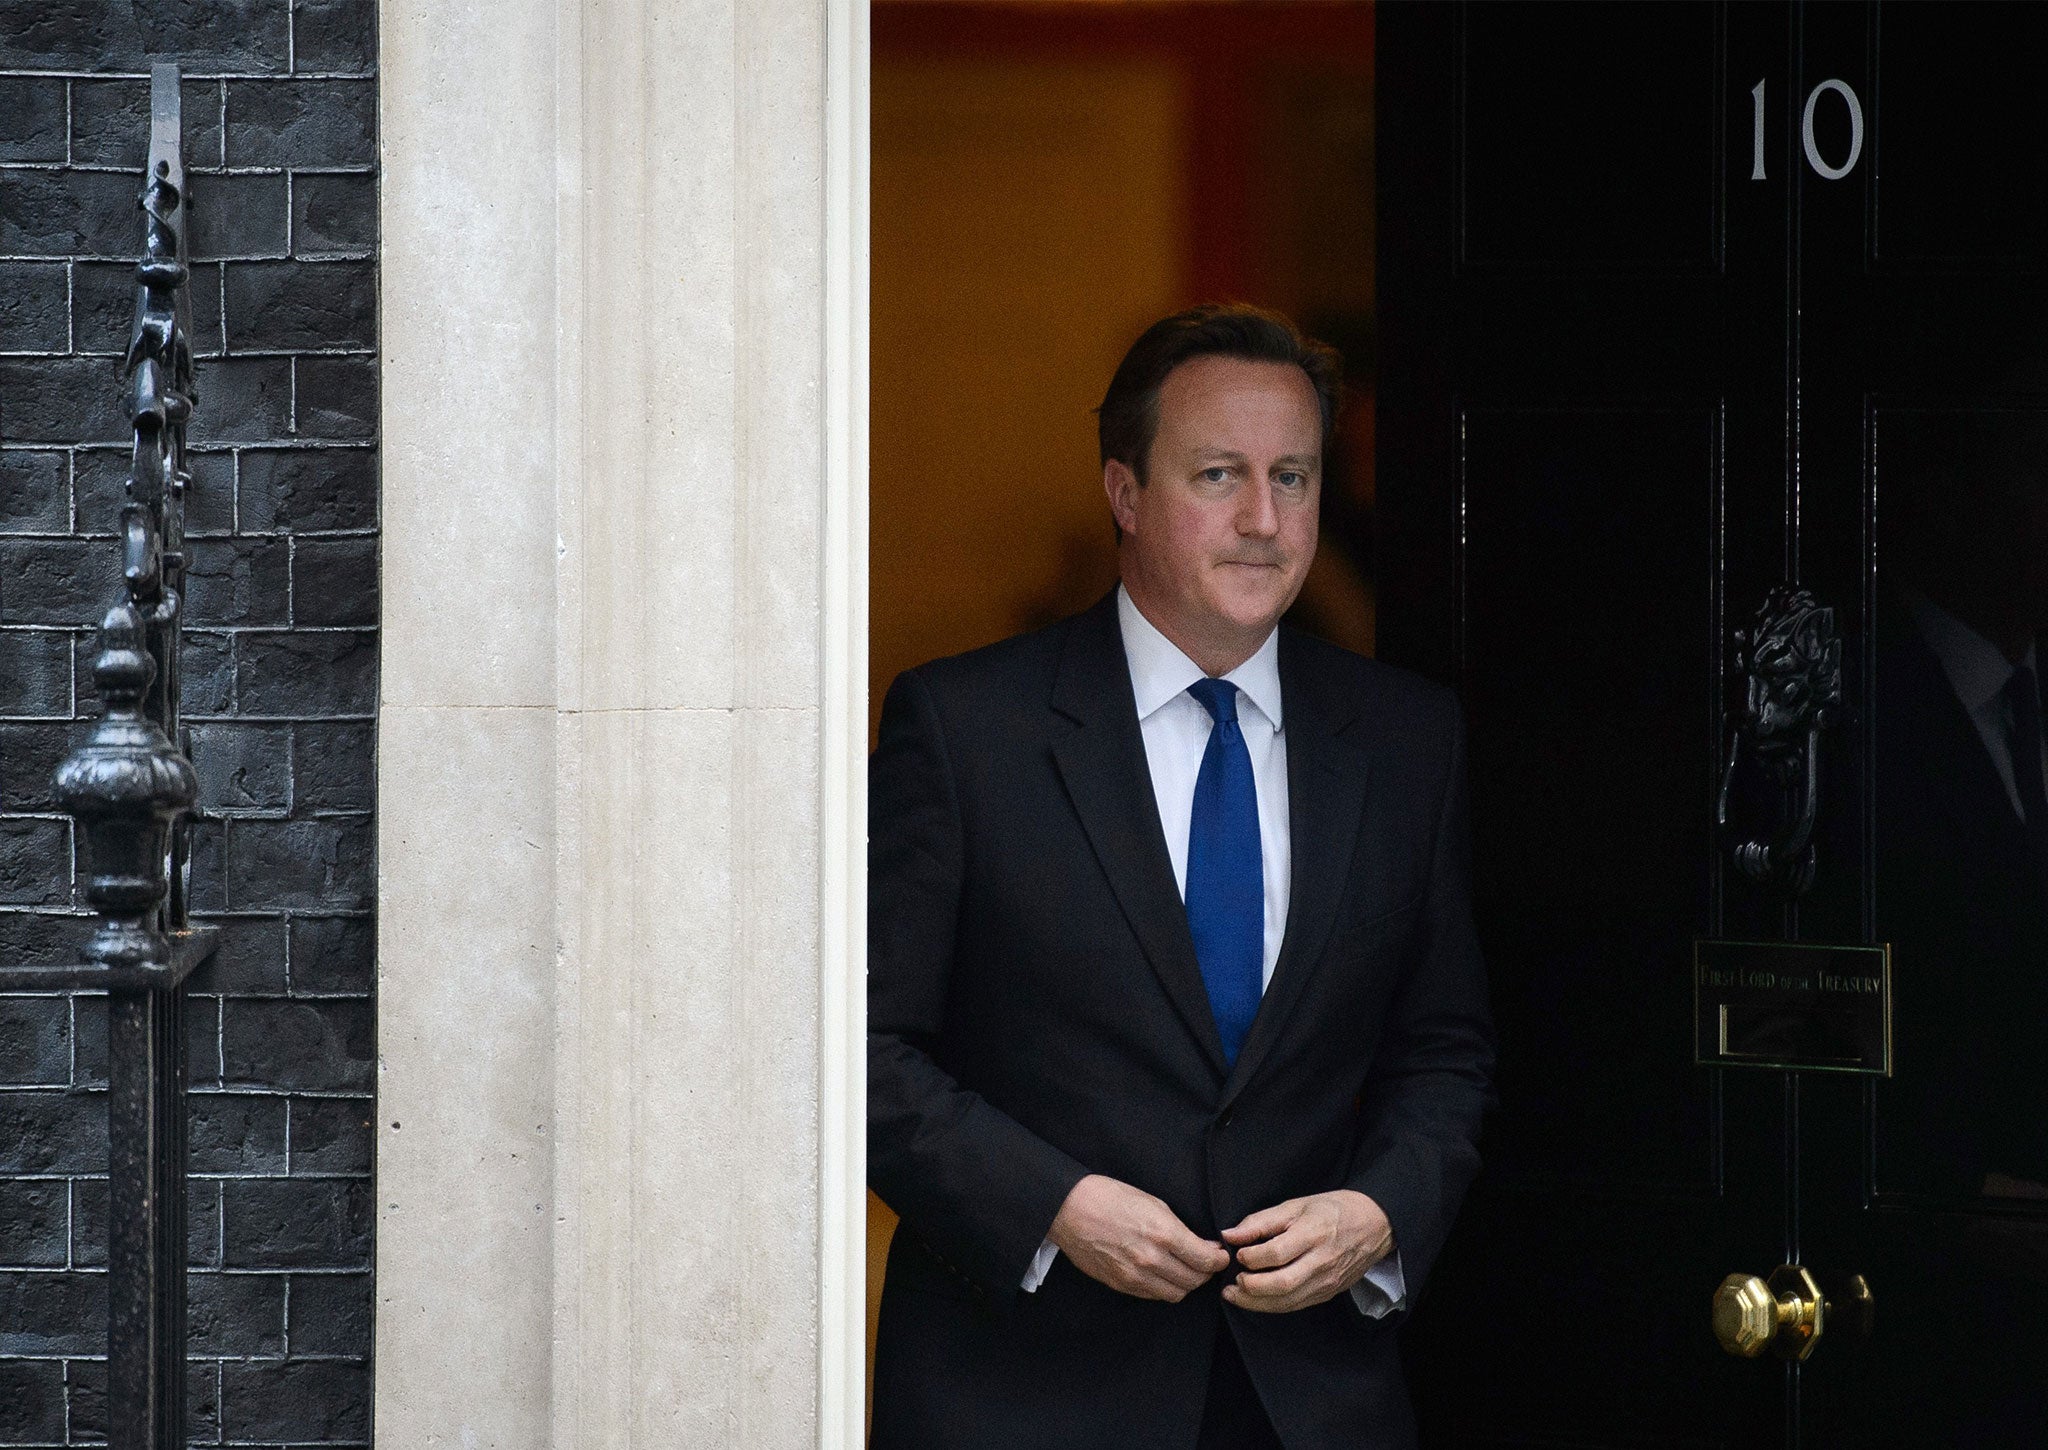 Cameron stands at the door of 10 Downing Street